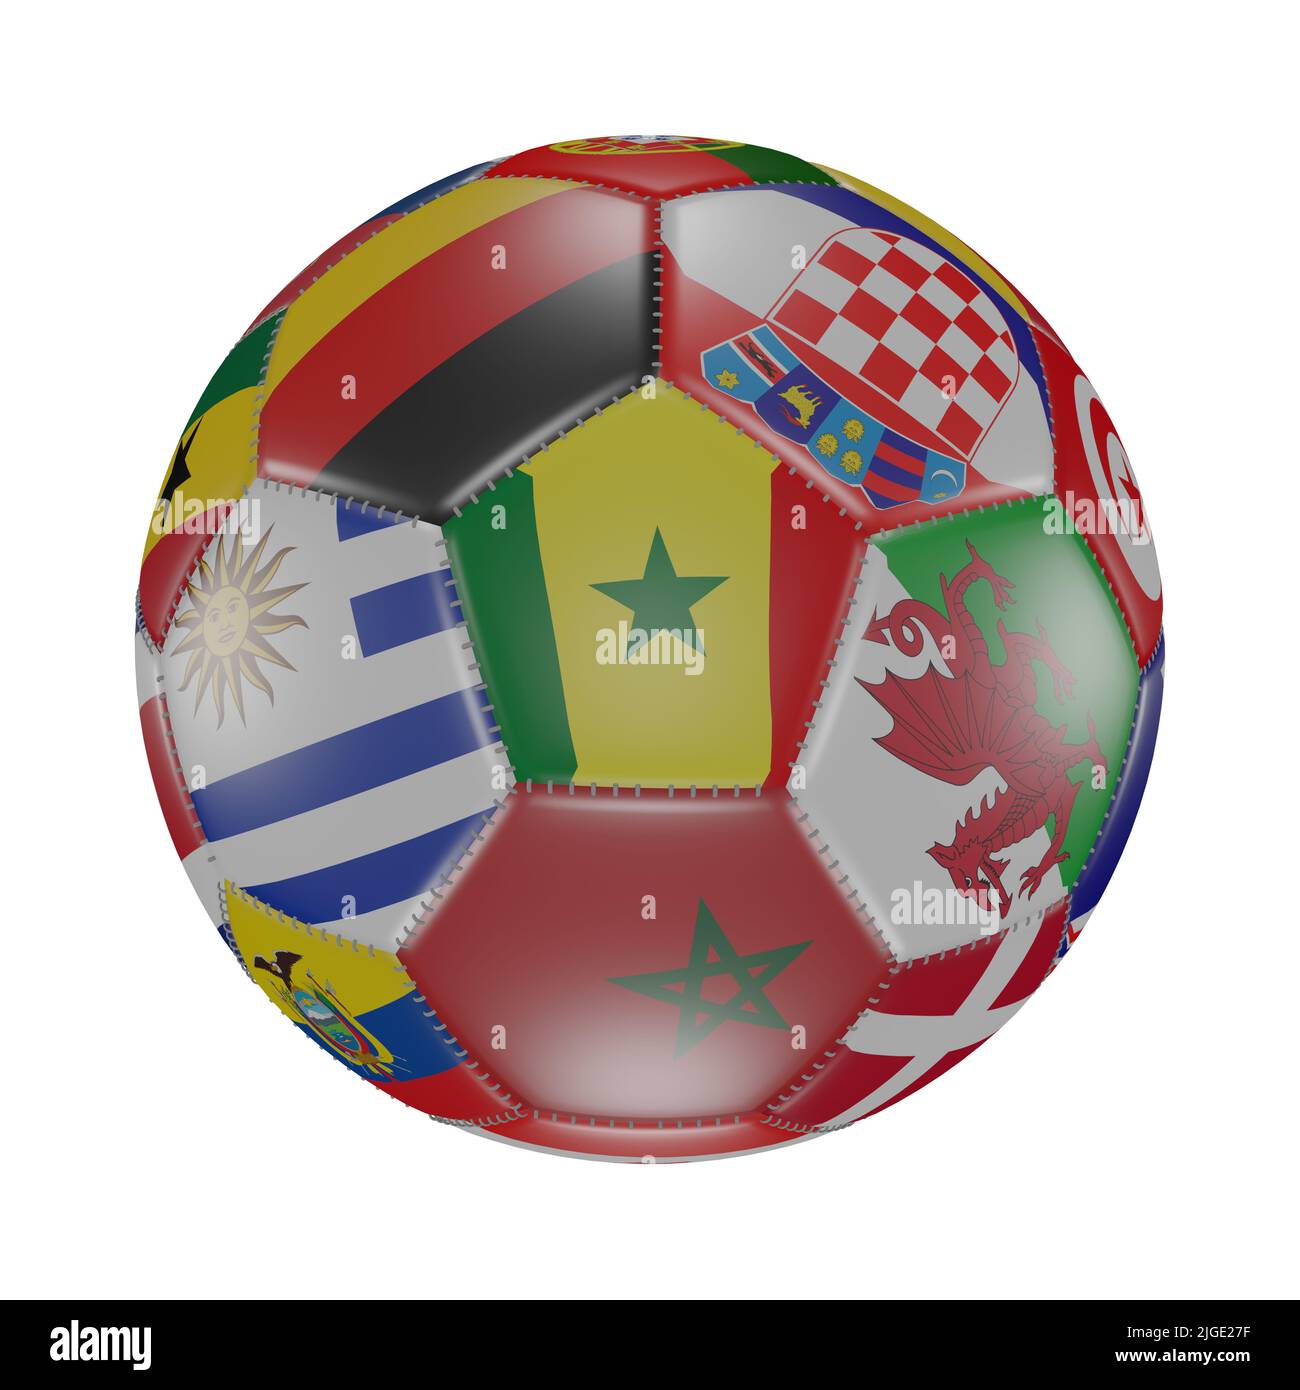 Senegal flag among other world flags on 3D soccer ball. Isolated on white. Qatar 2022. Render Stock Photo